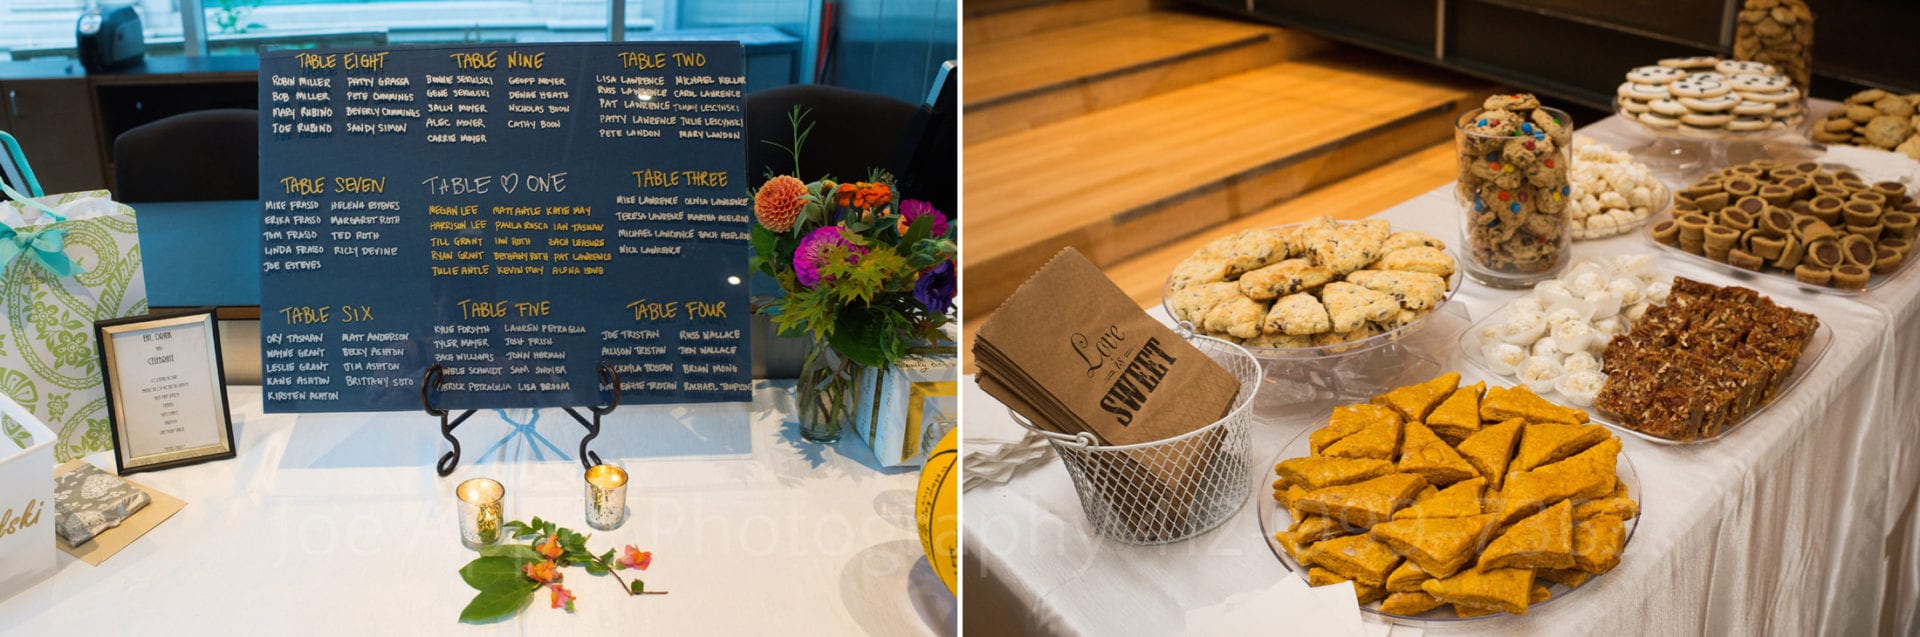 A cookie table and an escort table with a chalkboard showing seating assignments.